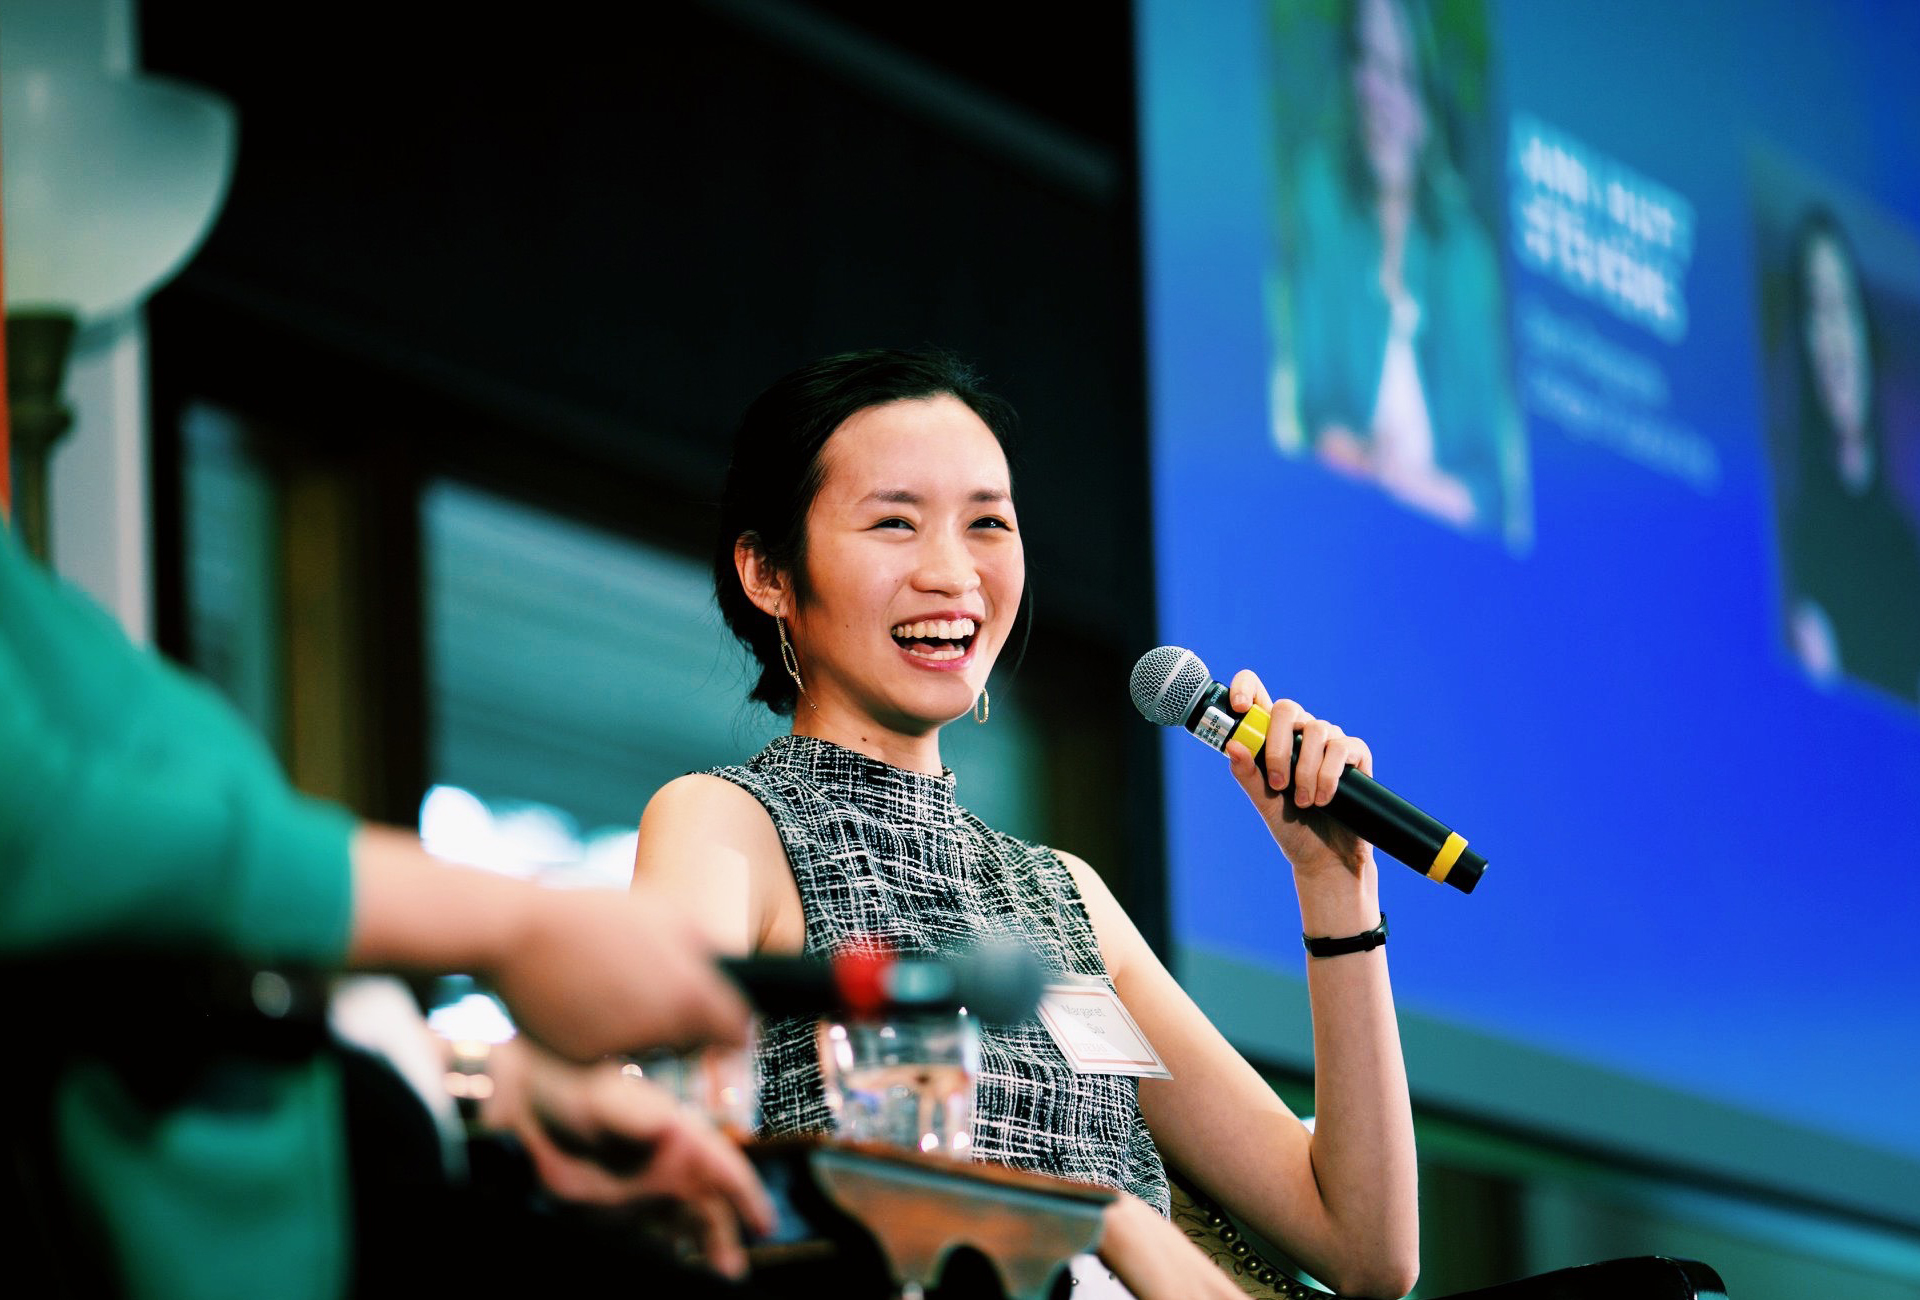 Margaret Siu sits in a chair while holding a microphone up to her mouth. She is laughing happily at what is clearly a public speaking event.